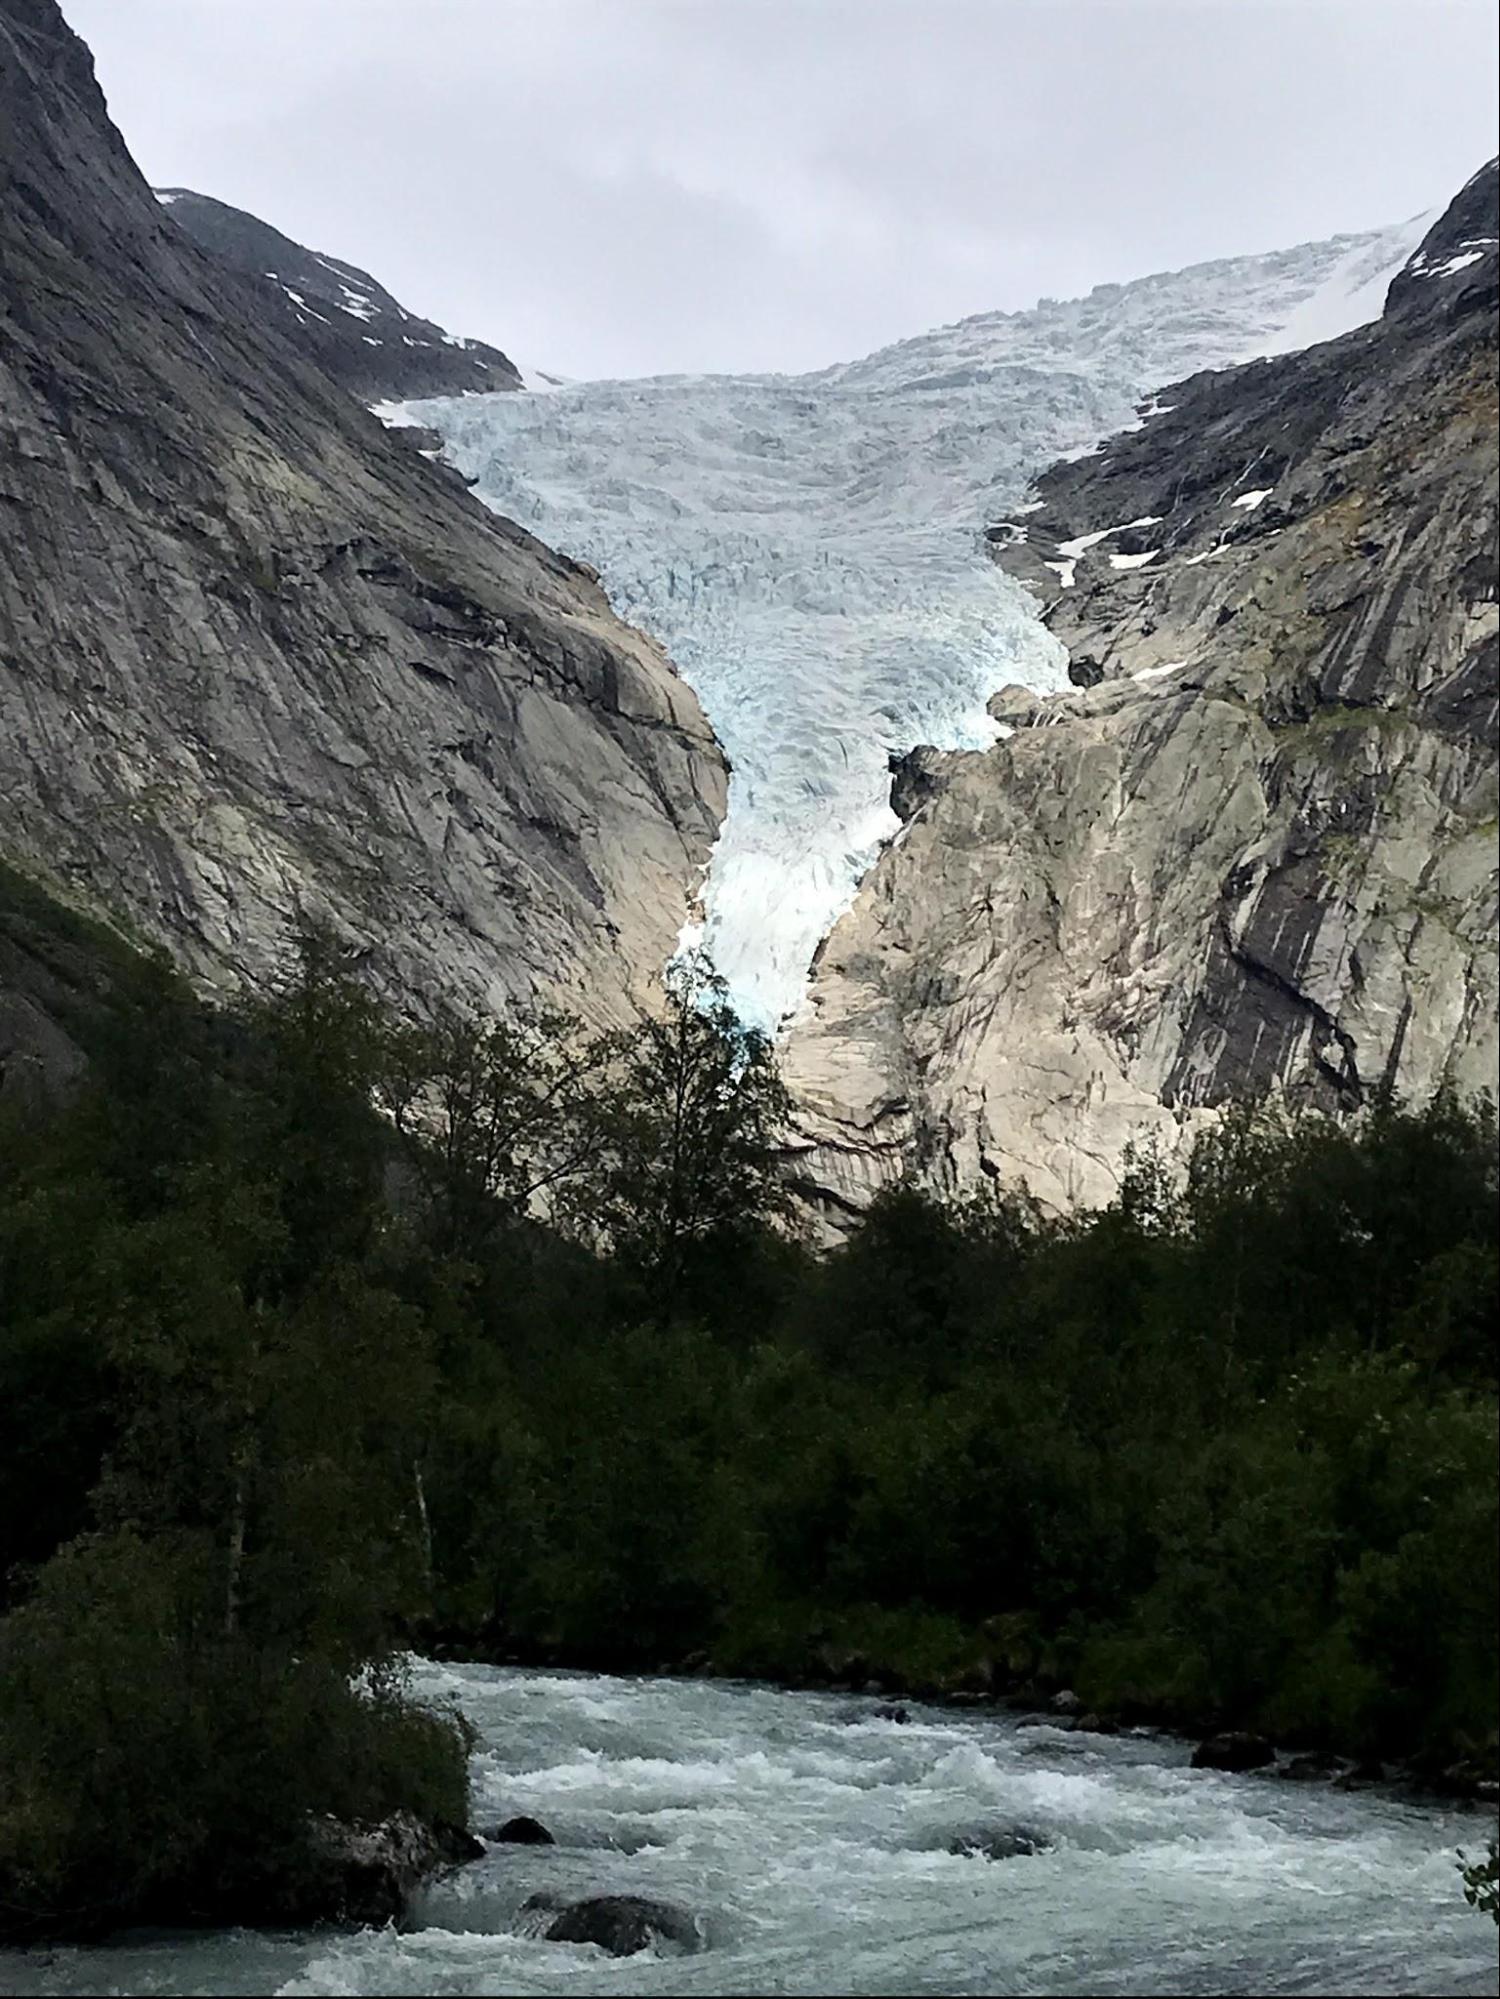 Glacier from the last Ice Age that rests amongst the mountains of Norway